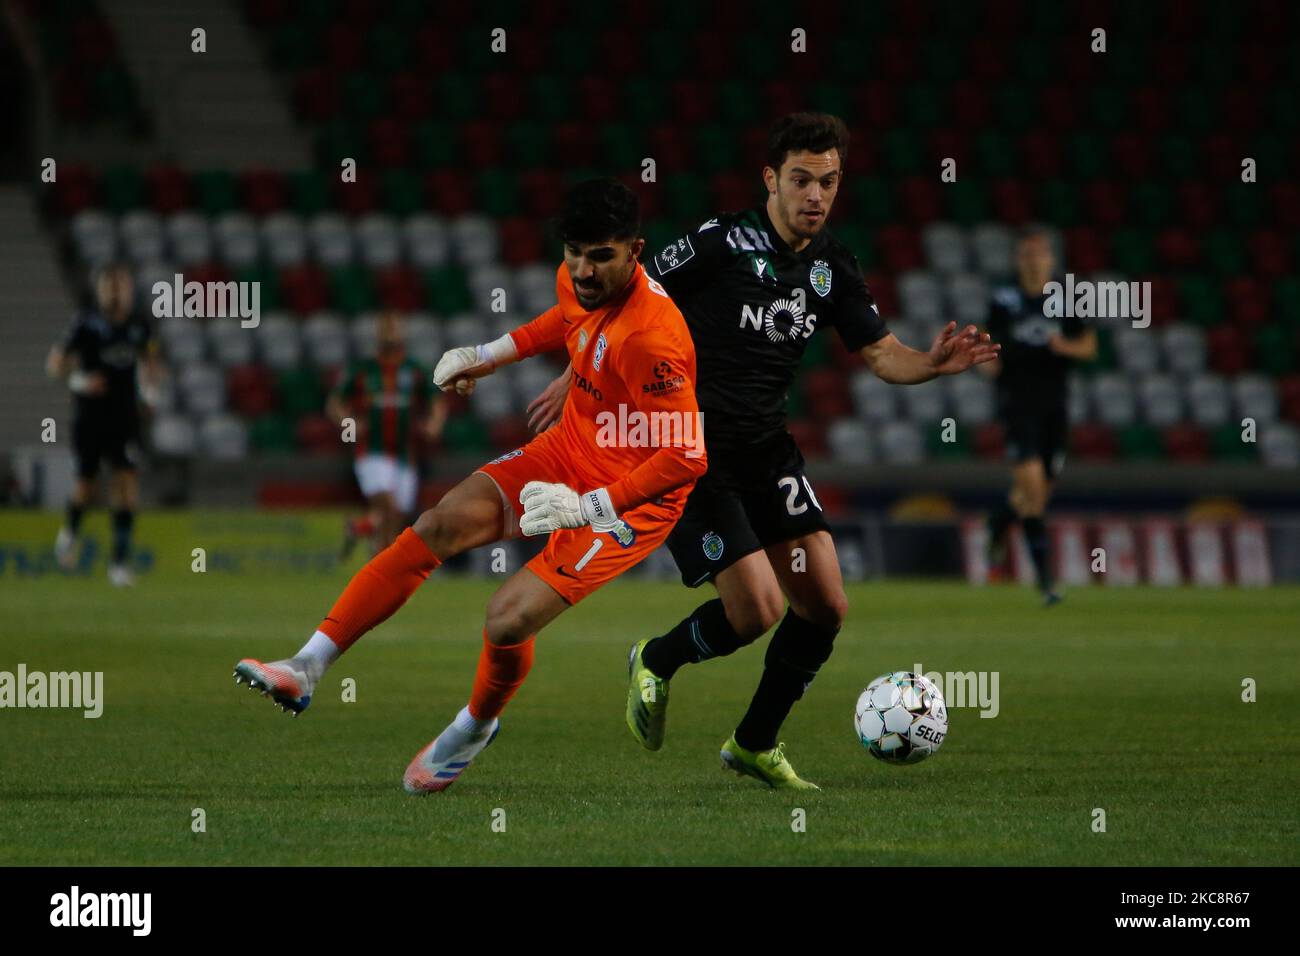 Pedro Gonçalves midfielder of Sporting CP battle for the ball with Amir goalkeeper of CS Maritimo during the Liga Nos match between CS Maritimo and Sporting SP at Estádio do Maritimo on February 05, 2021 in Funchal, Madeira, Portugal. (Photo by Valter Gouveia/NurPhoto) Stock Photo